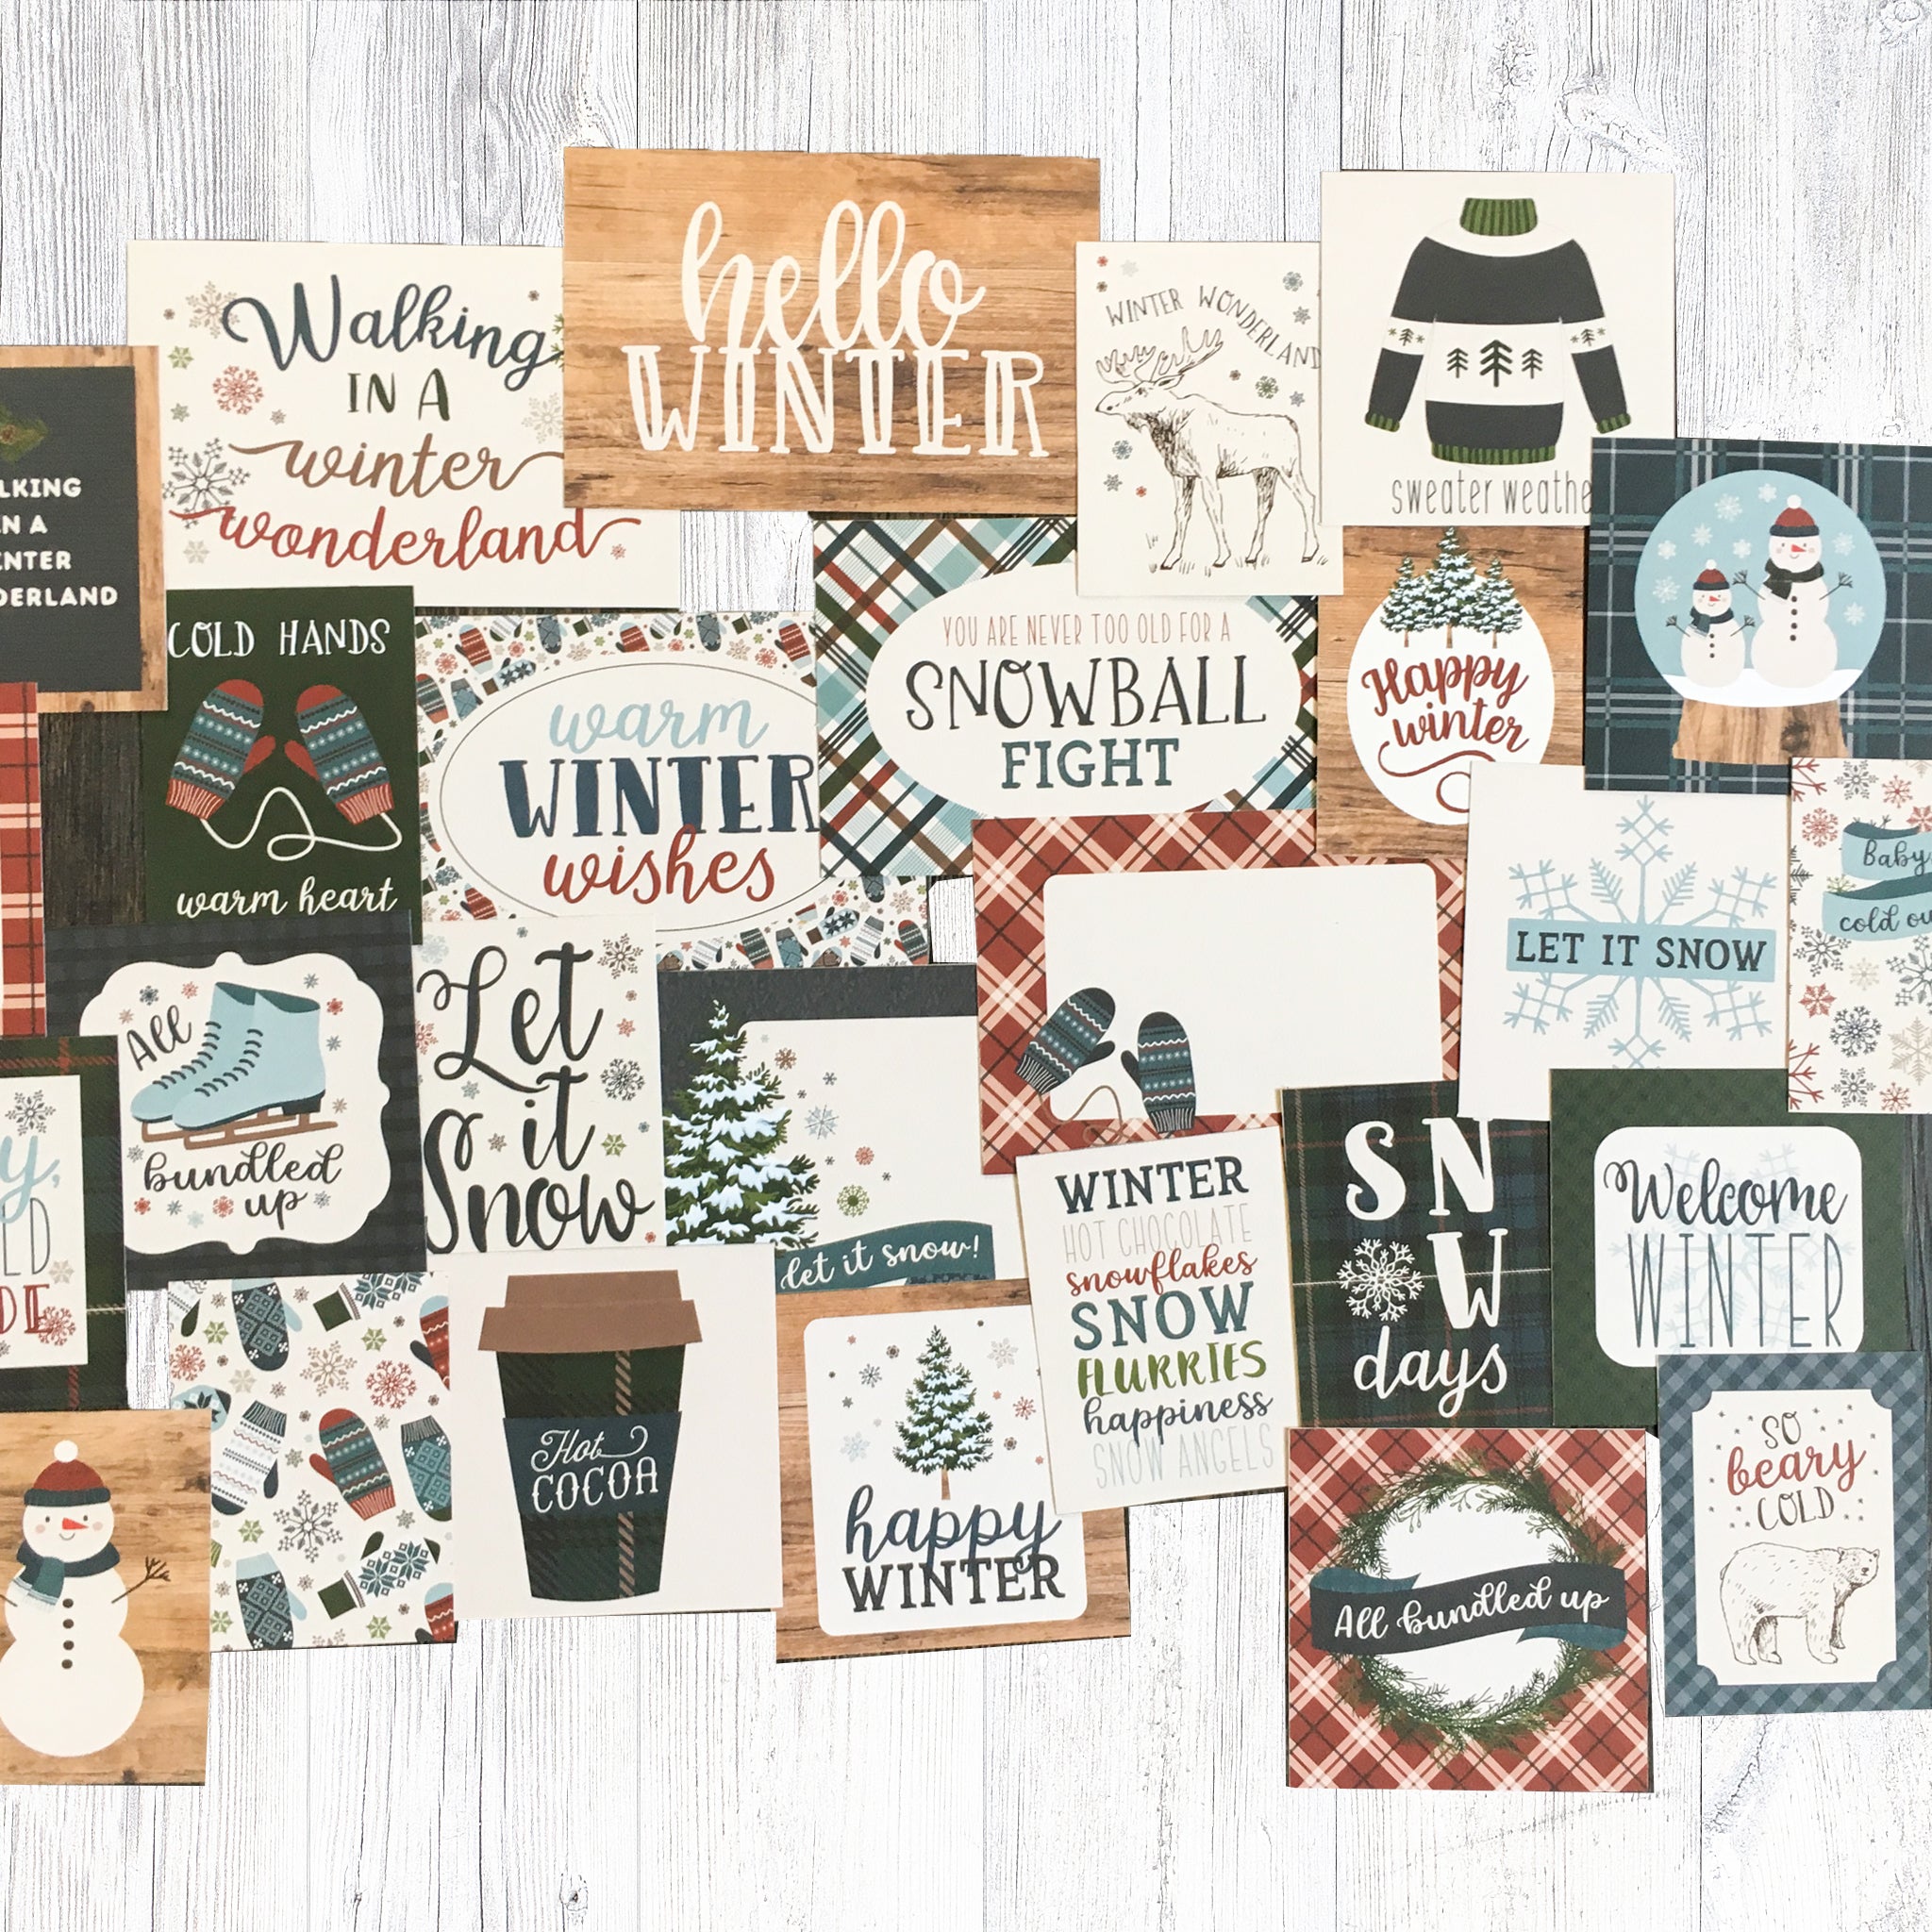 "HELLO WINTER" JOURNALING CARD ONLY ADD-ON